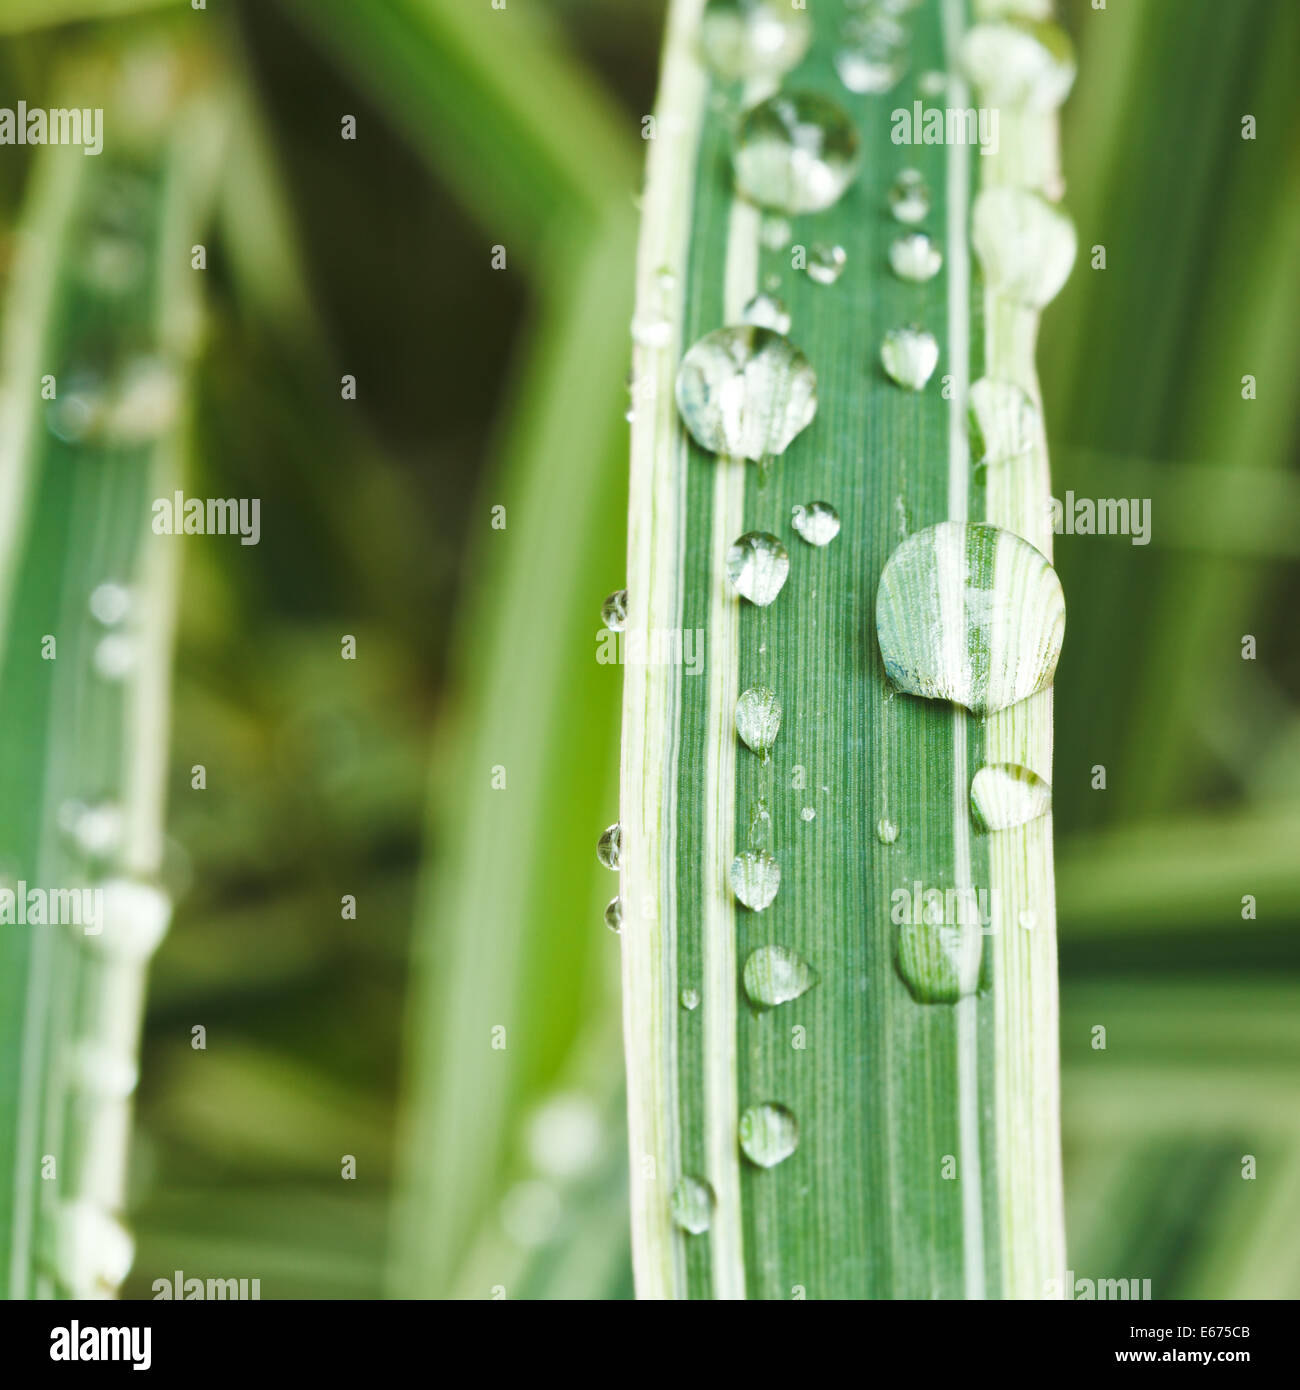 rain drops on green blades of carex morrowii japonica close up Stock Photo